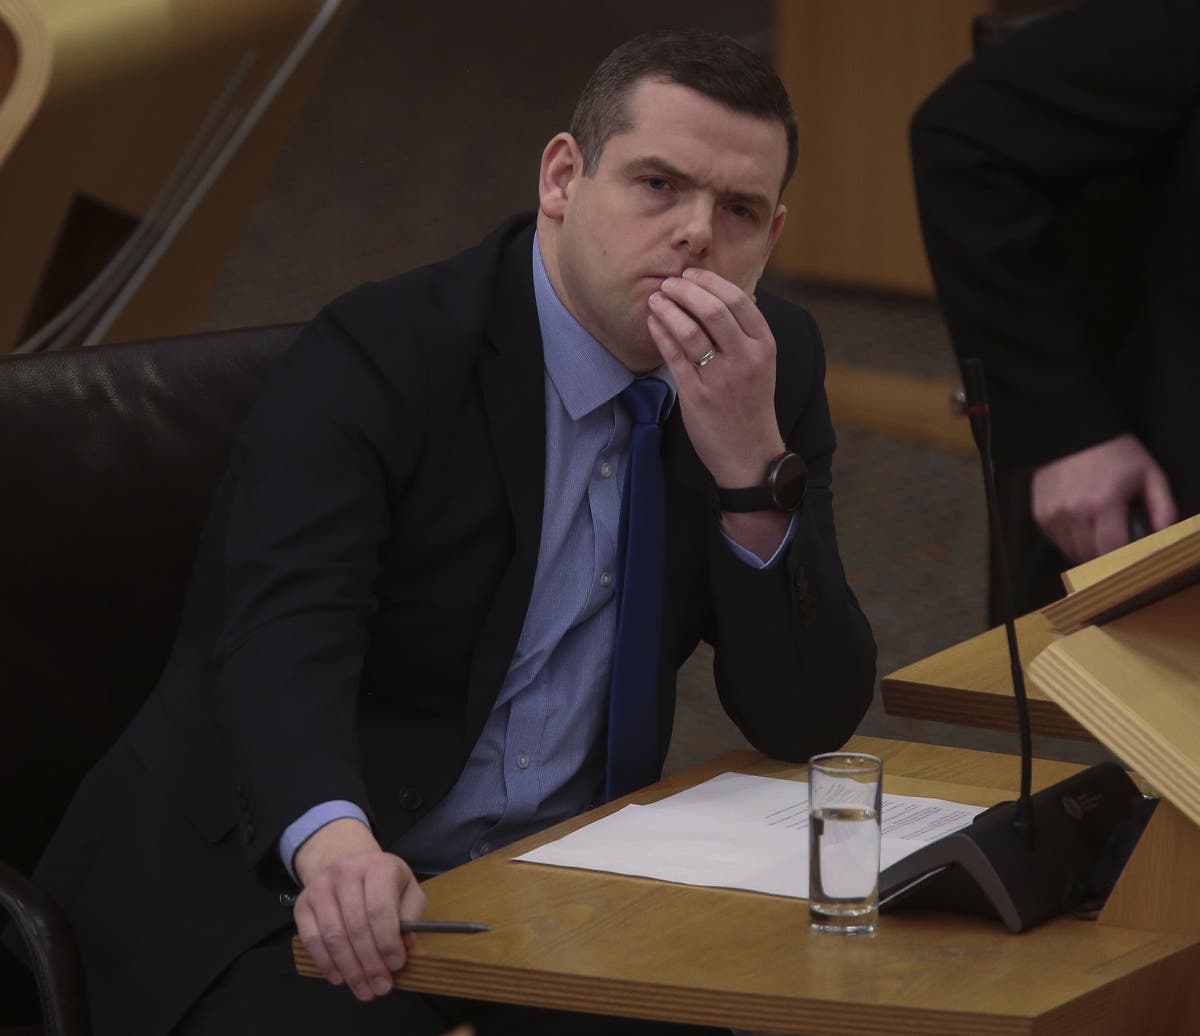 Douglas Ross urged to act against PM amid latest lockdown party claims